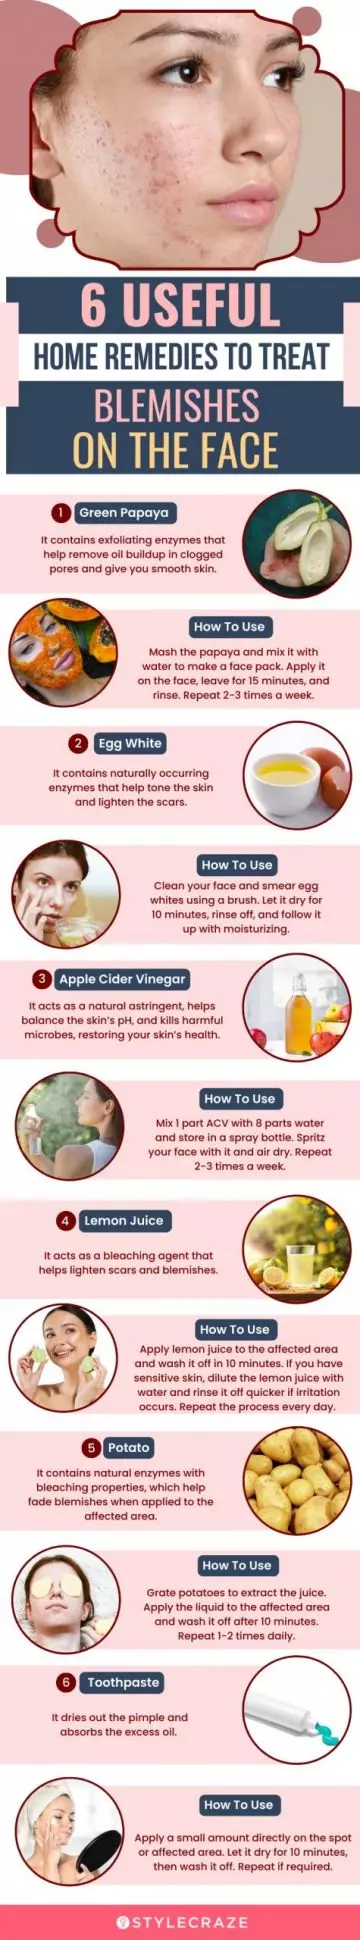 6 useful home remedies to treat blemishes oh the face (infographic)